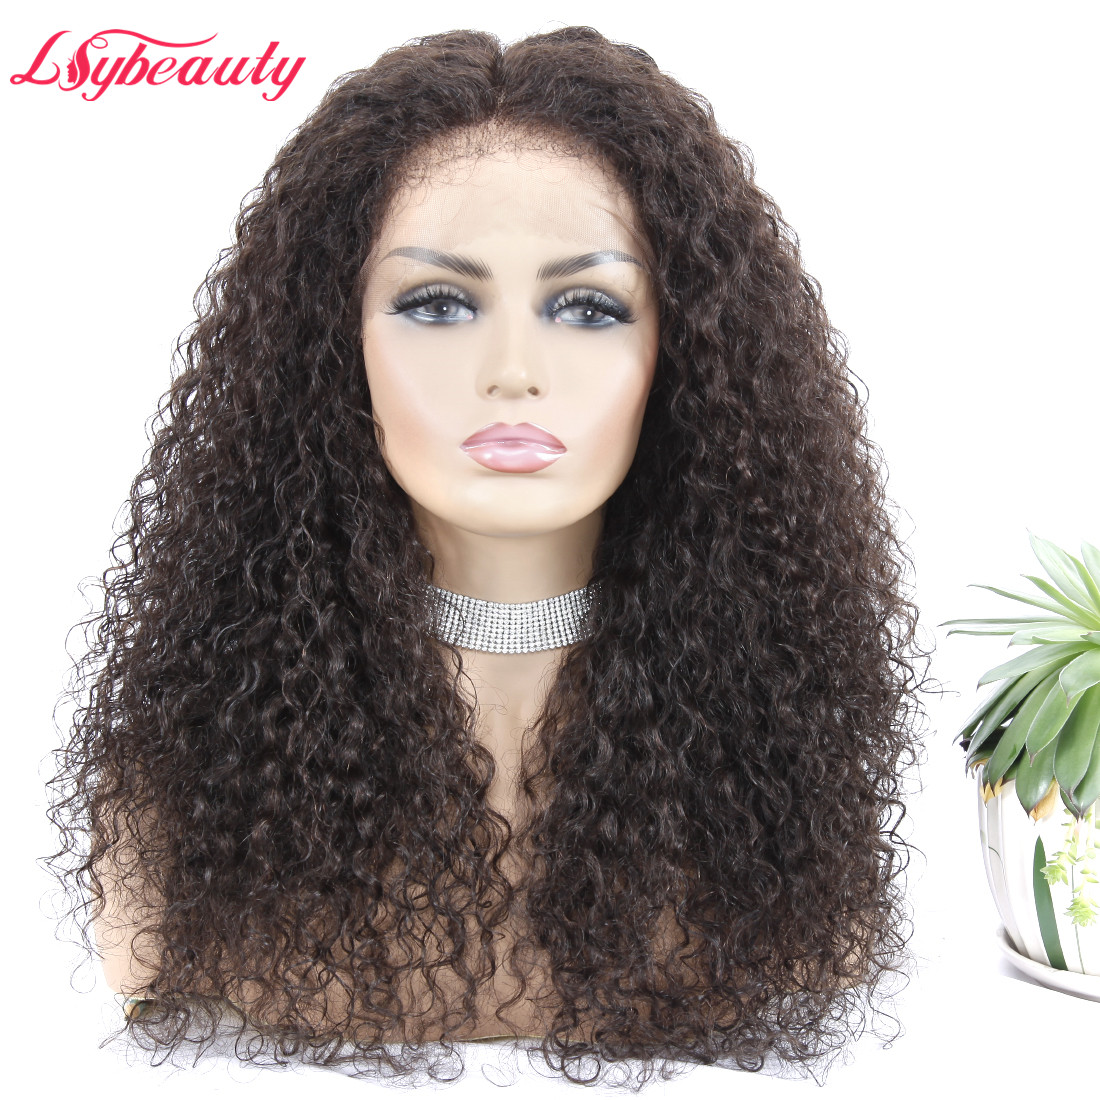 2020 New HD Super Natural Thin Transparent 360 Lace Front Wig Jerry Curl, 100% Virgin Remy Hair Curly 360 Full Lace Wig.